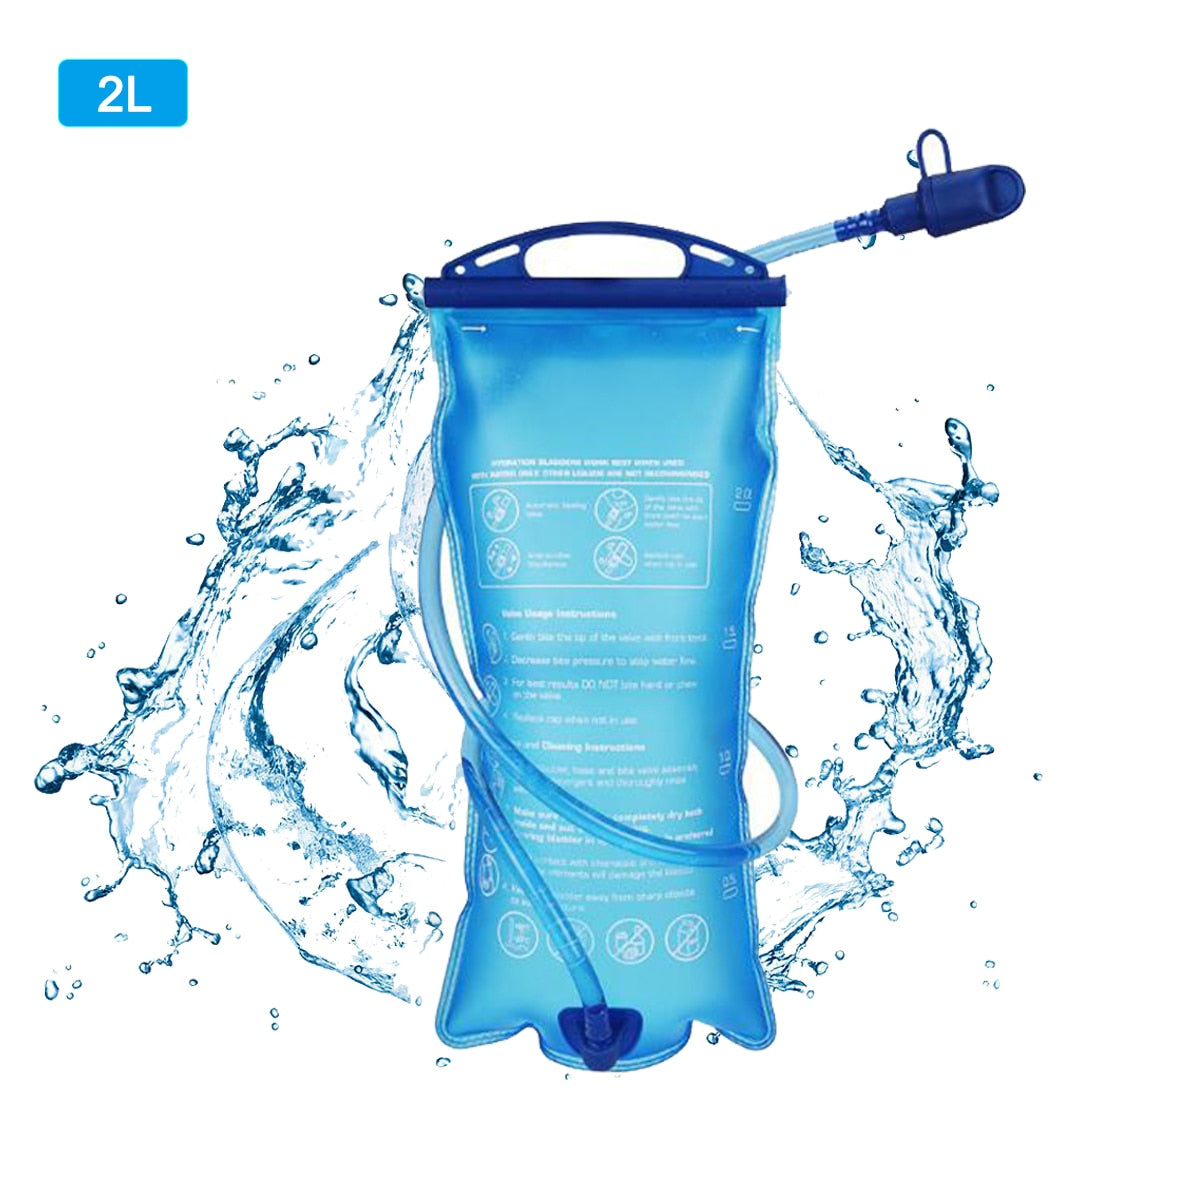 Portable TPU Water Bag 2L Hydration System Bladder Backpack Camping Hiking Climbing